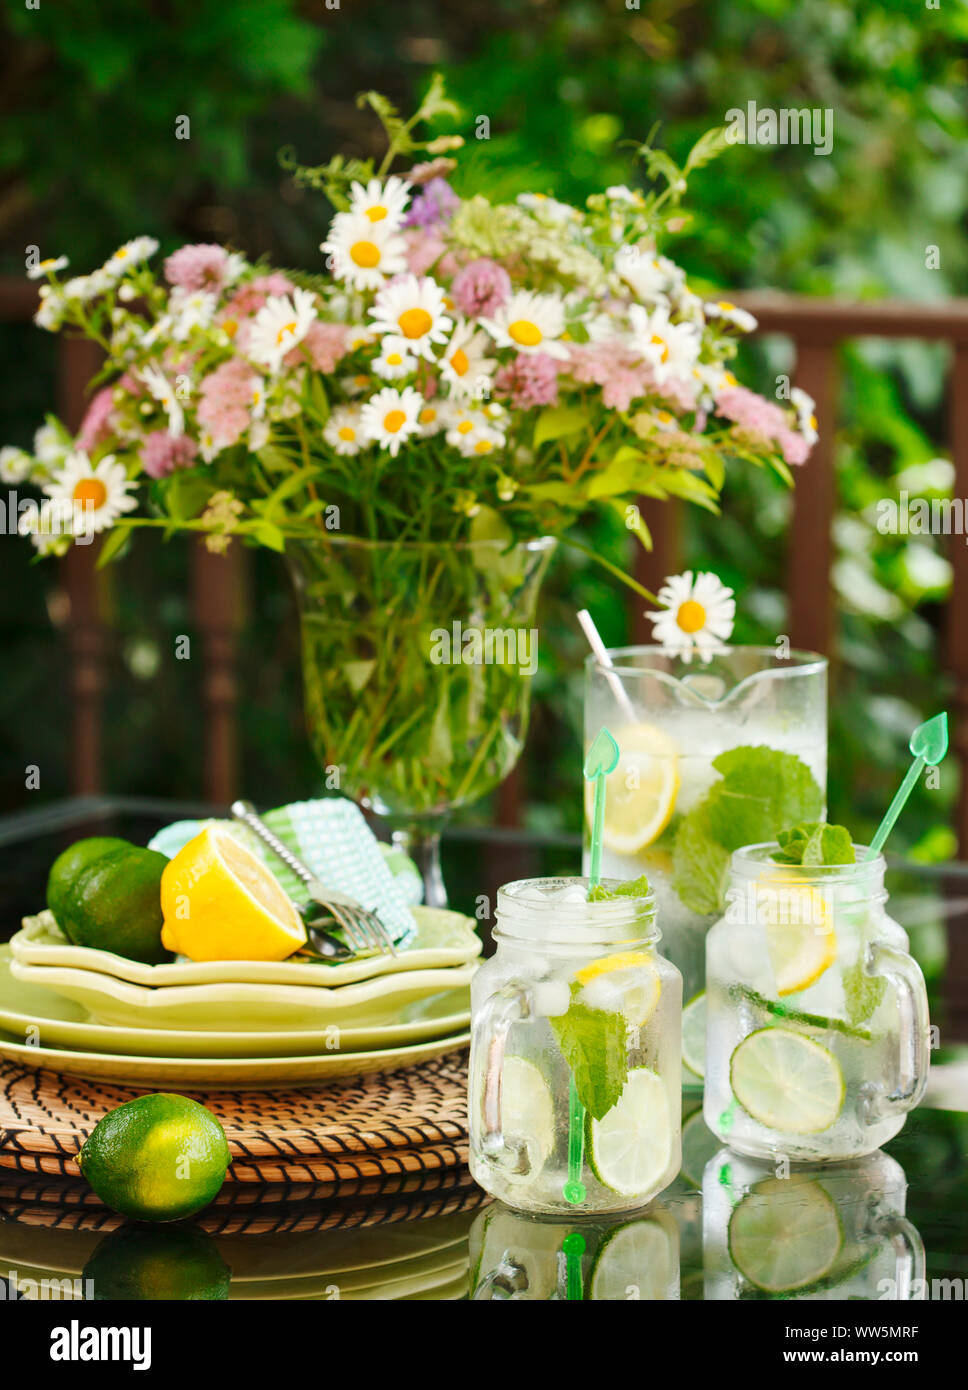 Jug and jars of Lemonade on a table in the garden Stock Photo